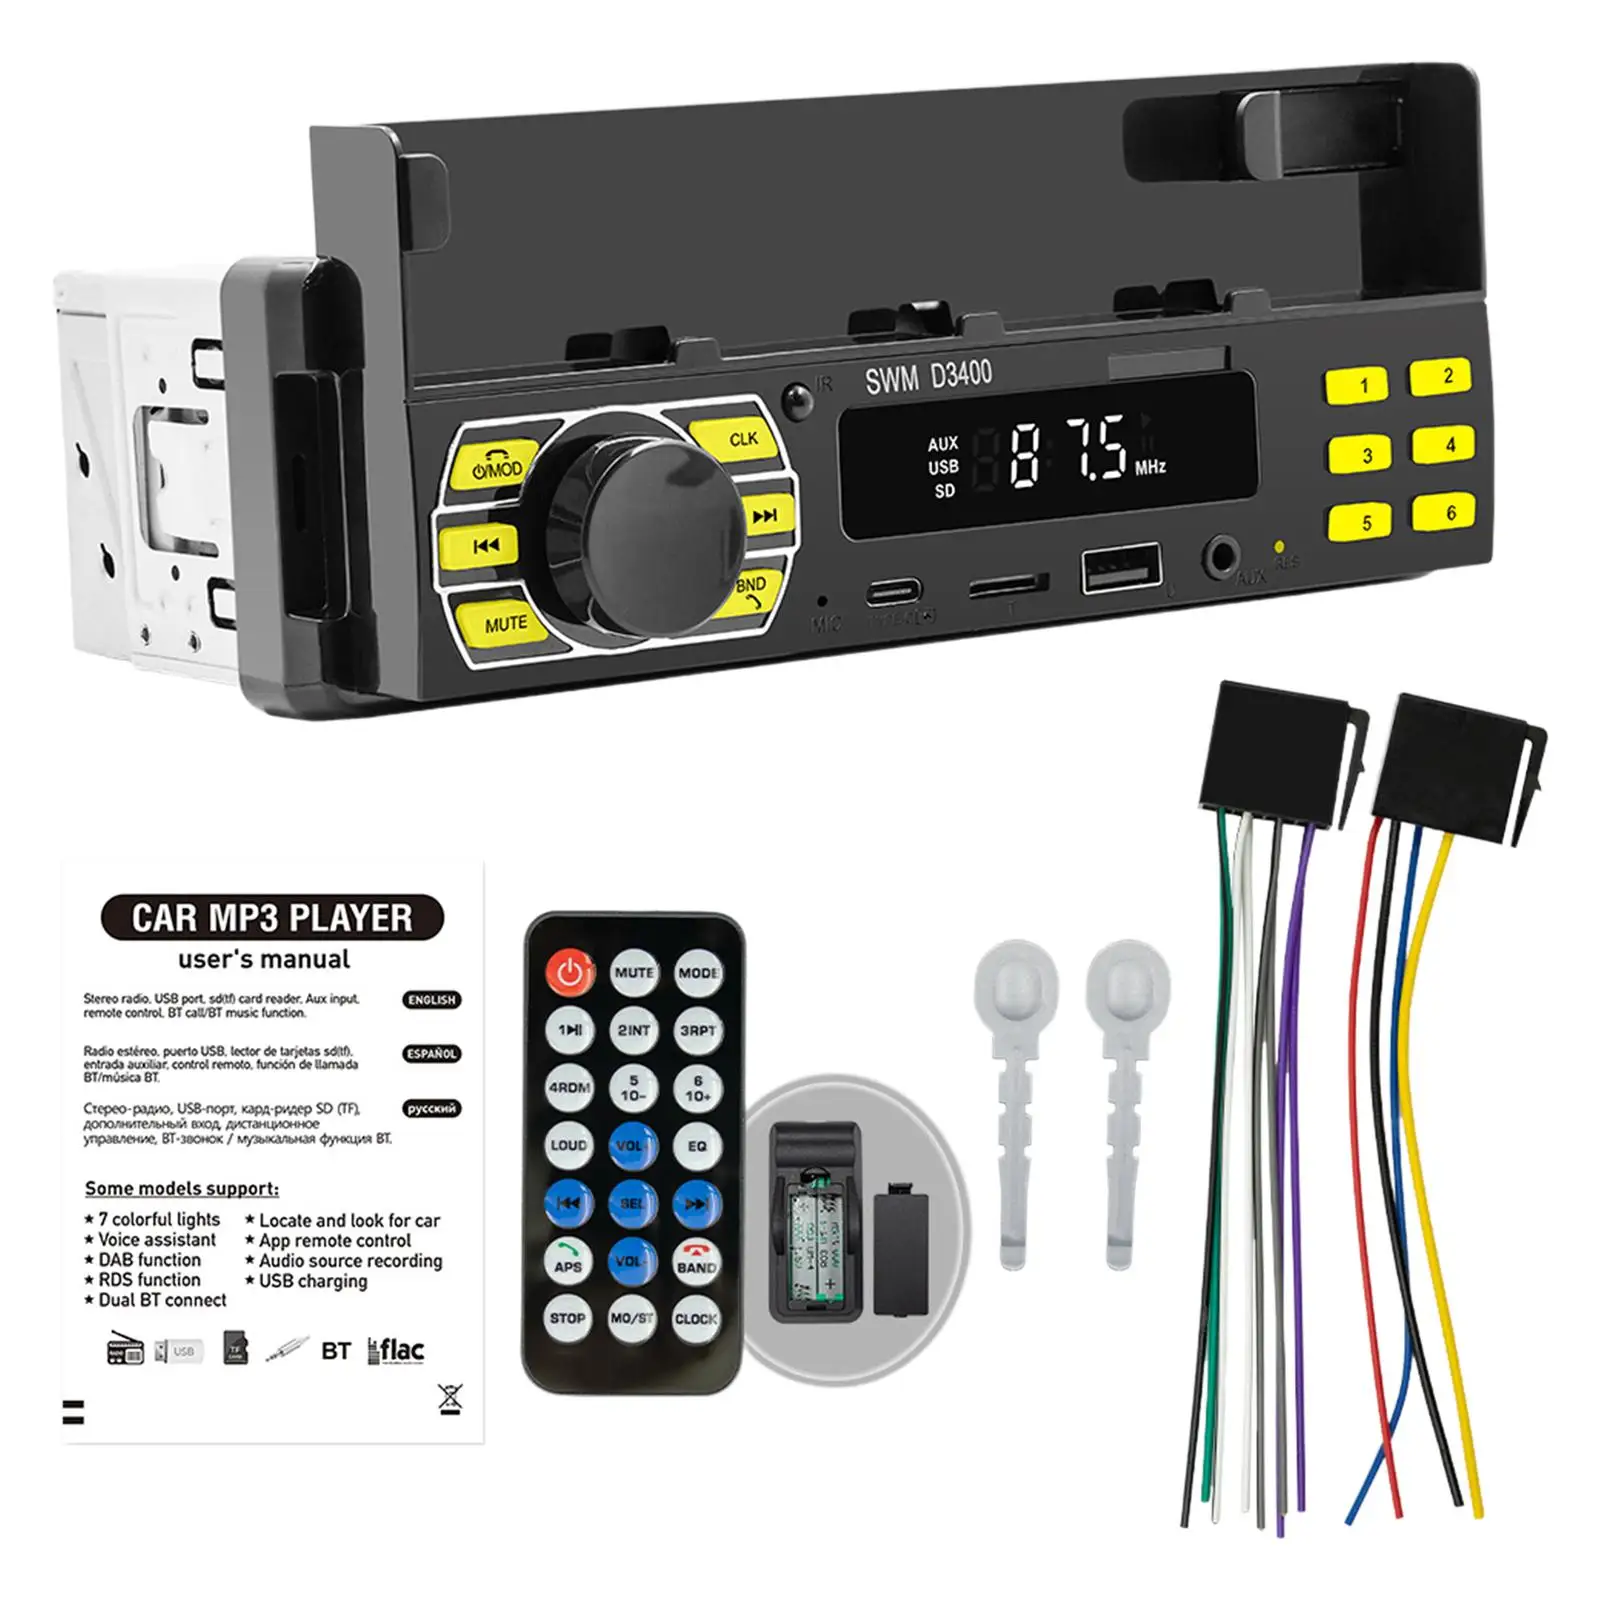 Car Radio Type Music Player LED Display AUX Input Voice Control Multimedia Player Car Audio Receiver for Trucks Cars